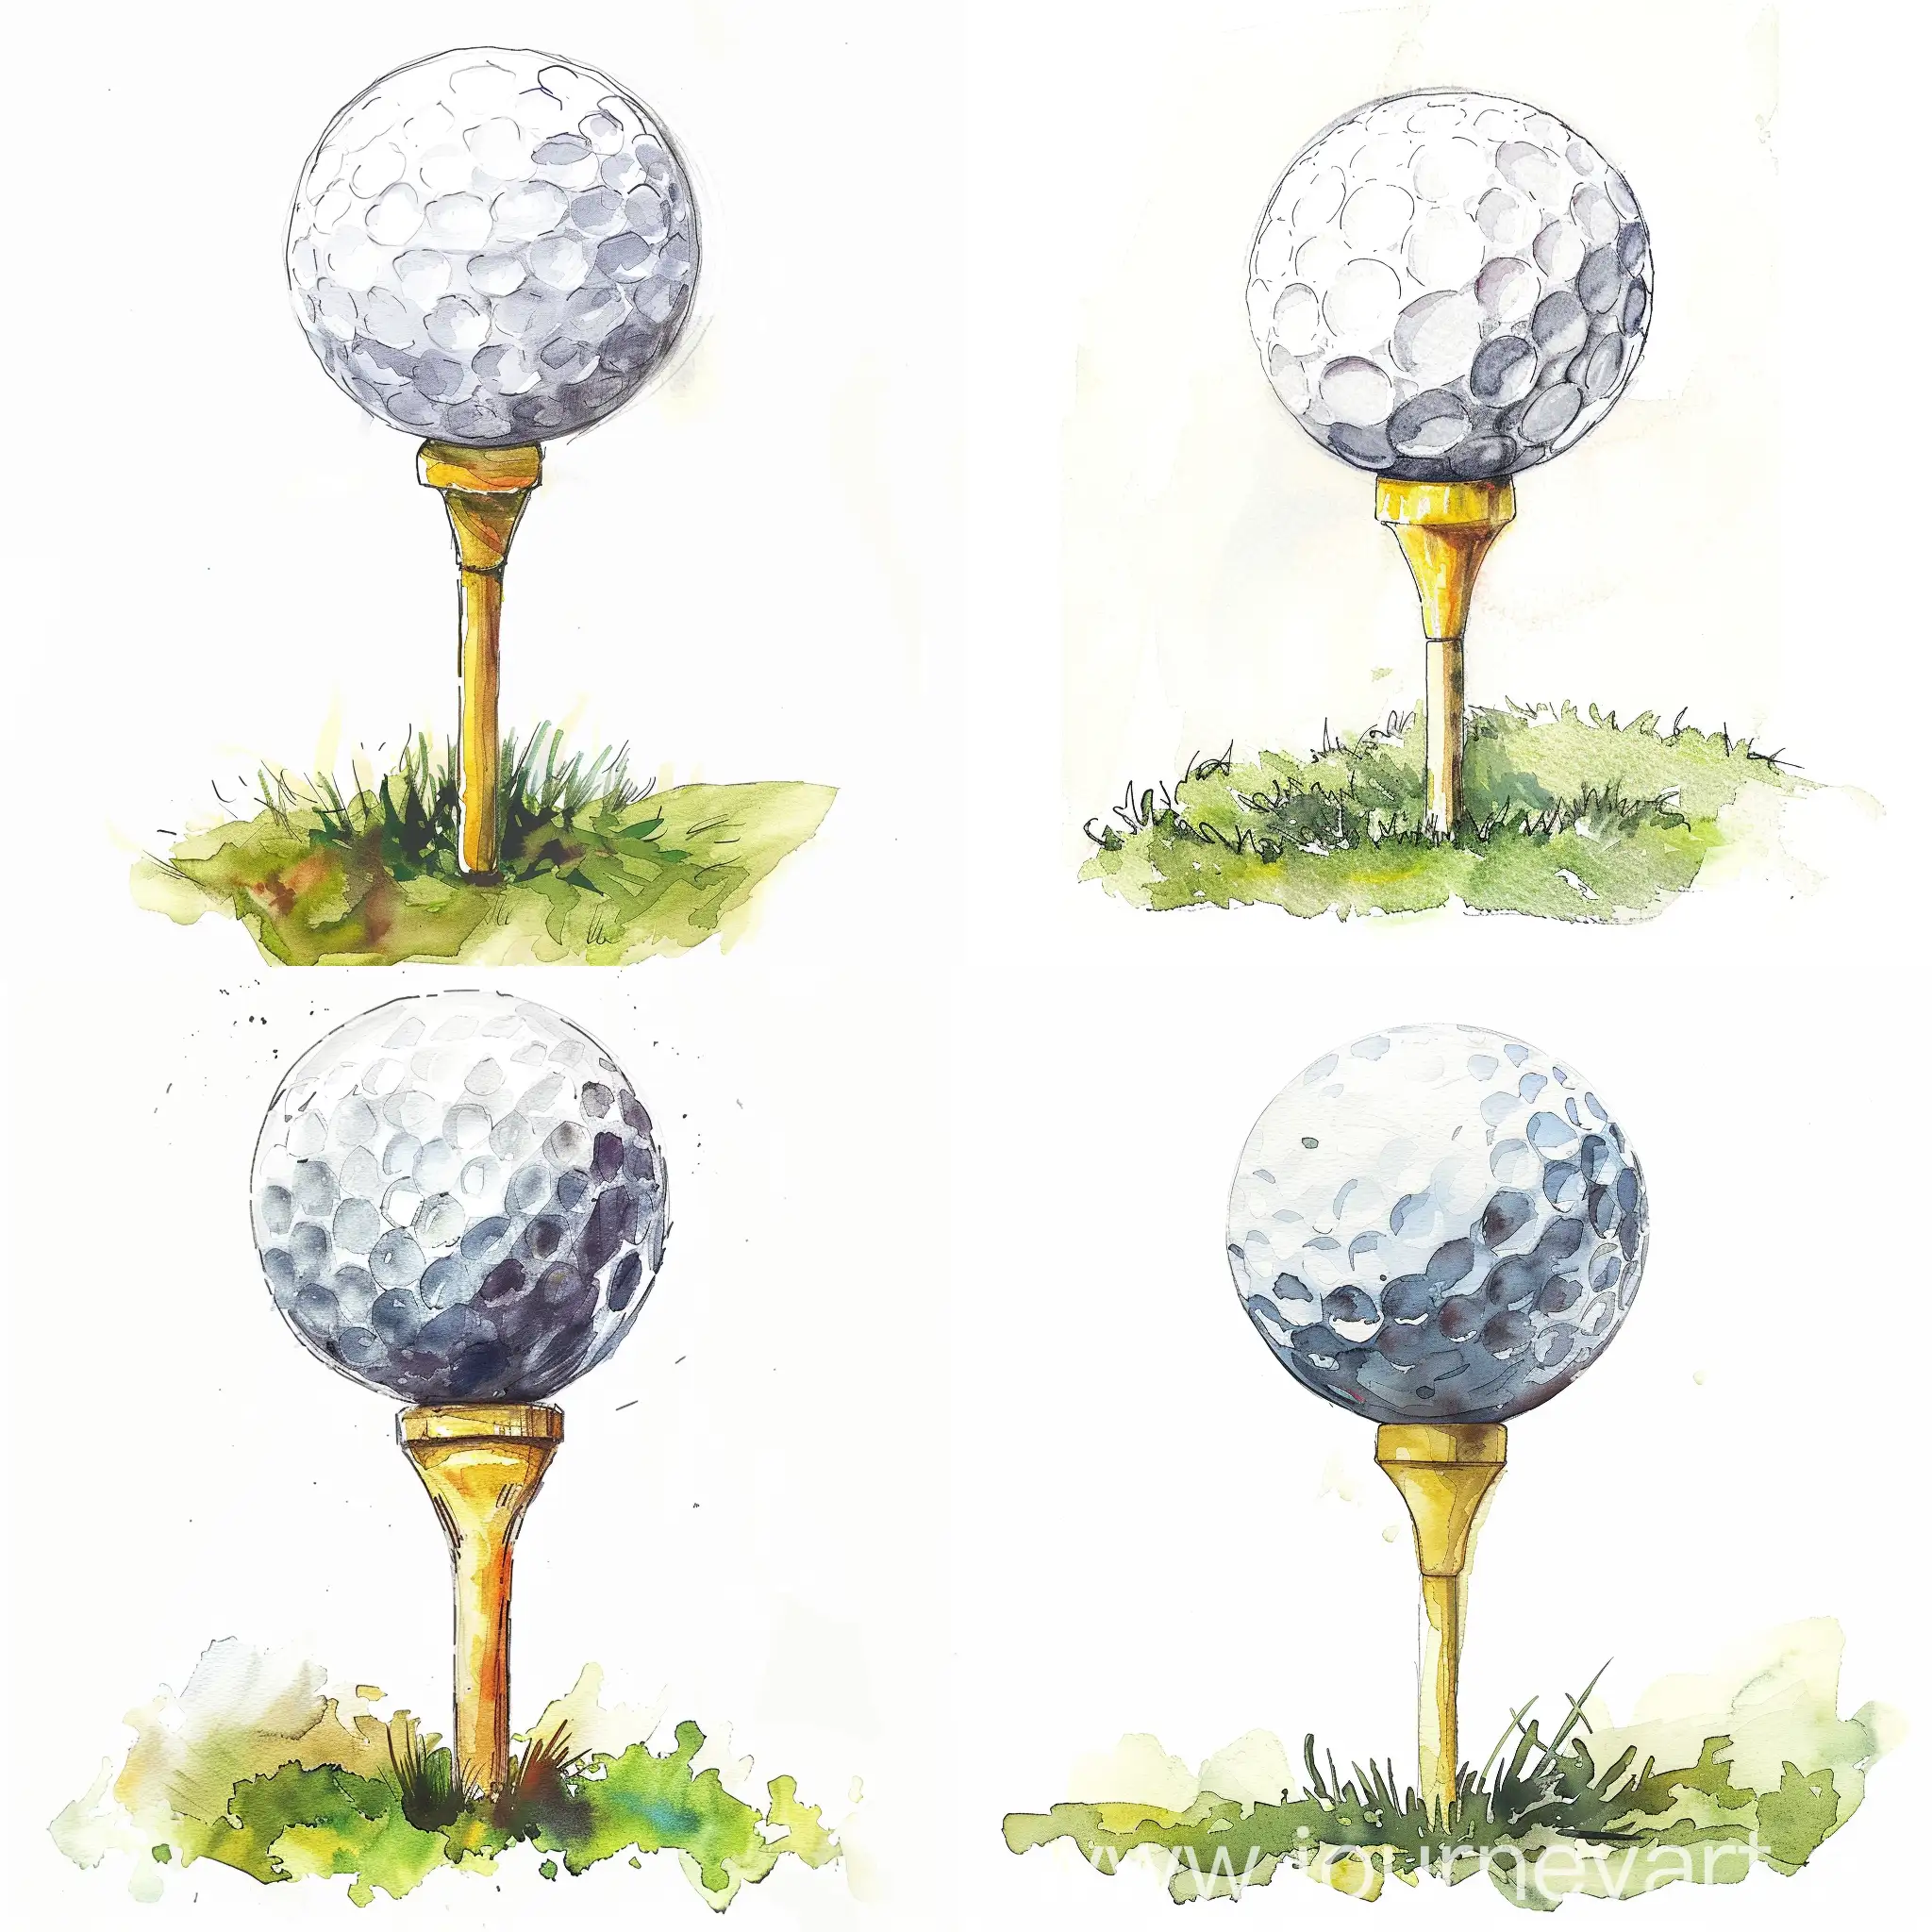 Artistic-Watercolor-Sketch-White-Golf-Ball-on-Bright-Yellow-Tee